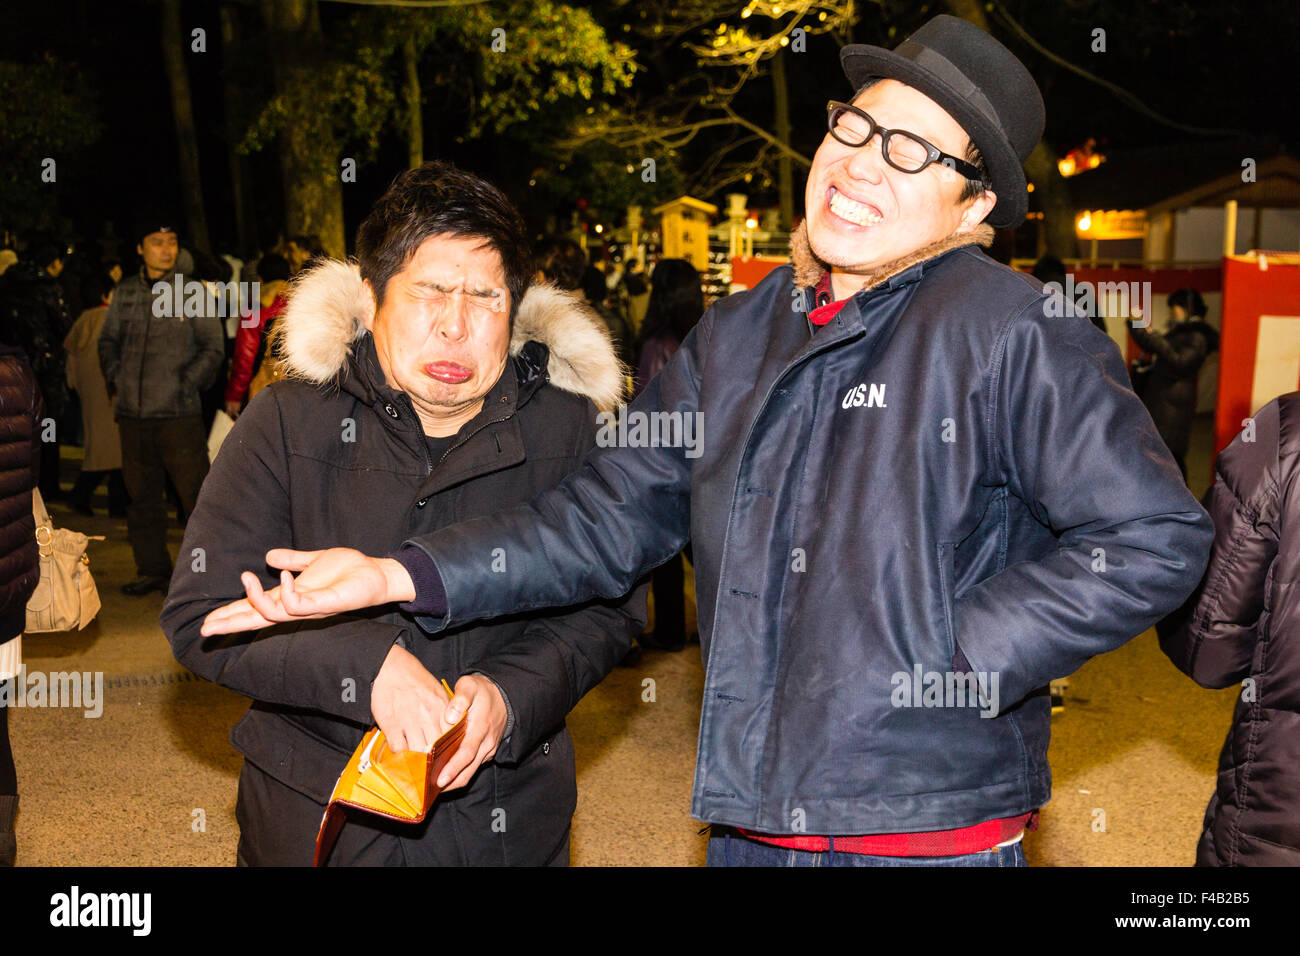 New Year's eve, Nishinomiya shrine, midnight. Two Japanese men pulling funny faces and laughing at the viewer while showing how cold the night is. Stock Photo